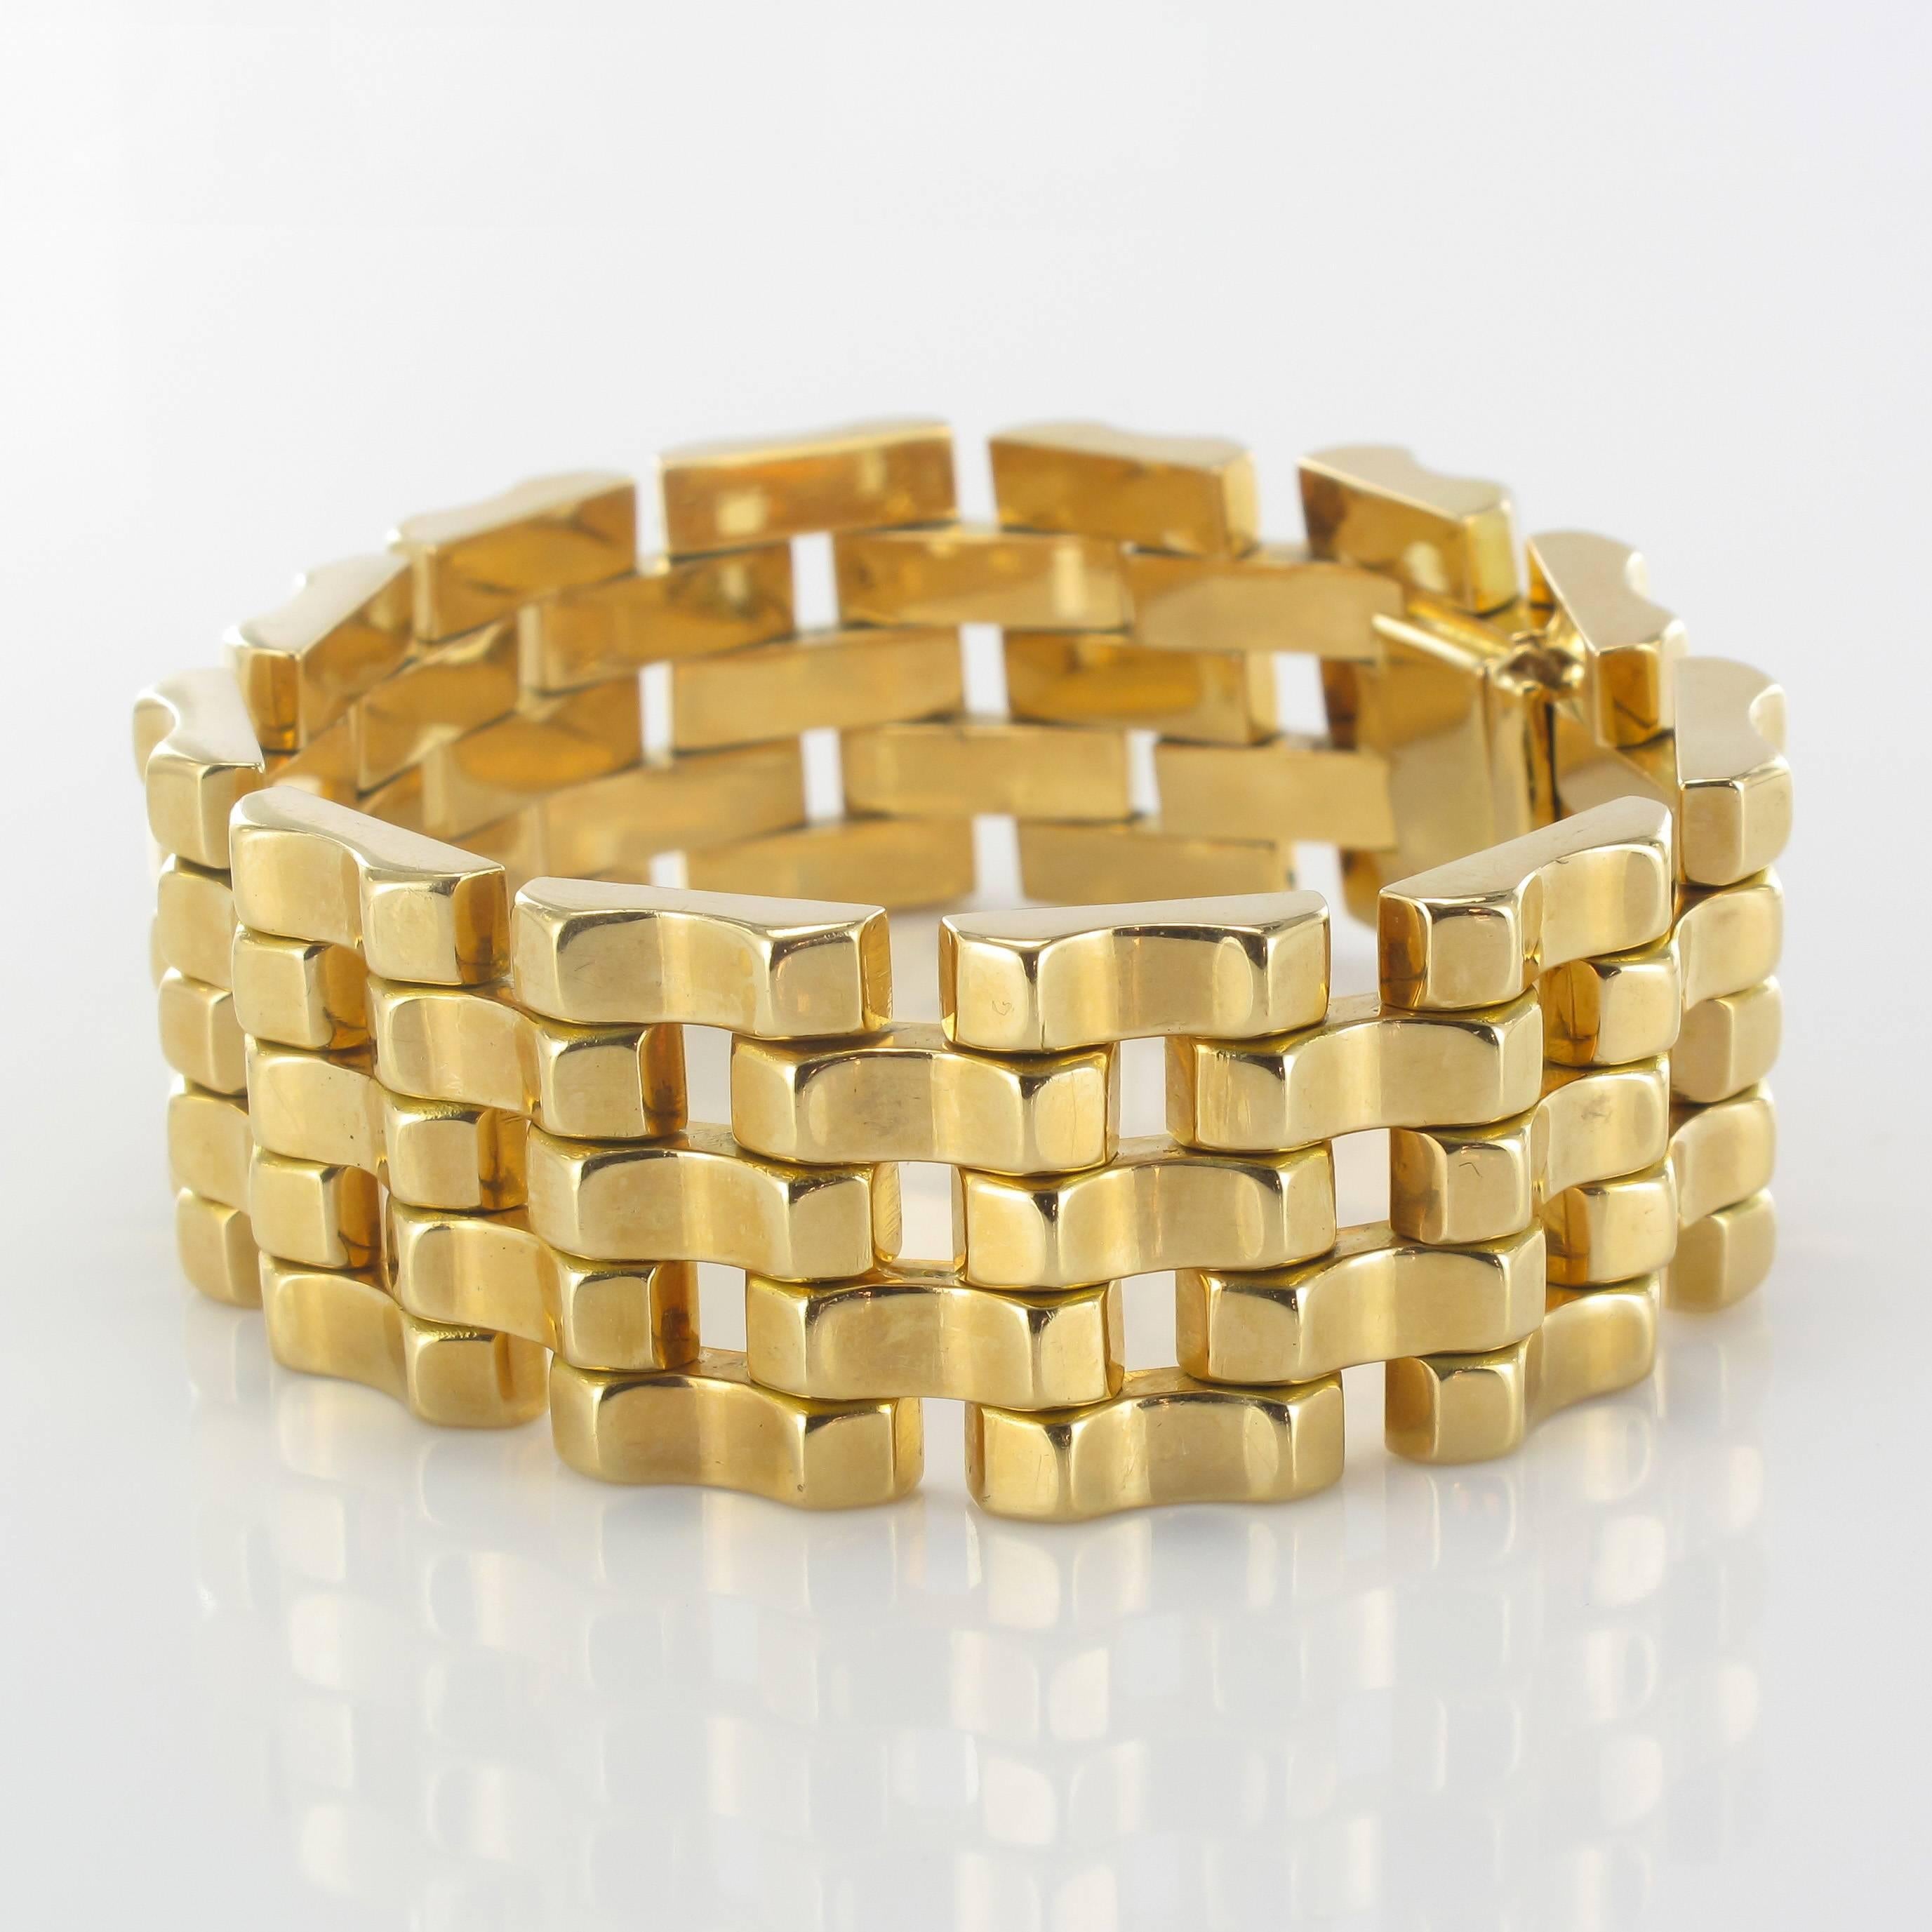 Bracelet in 18 carat yellow gold, eagle head hallmark. 

This splendid tank style bracelet is composed of large articulated geometric motifs each domed on the front. The clasp of this antique gold bracelet is a ratchet with a safety 8 feature.